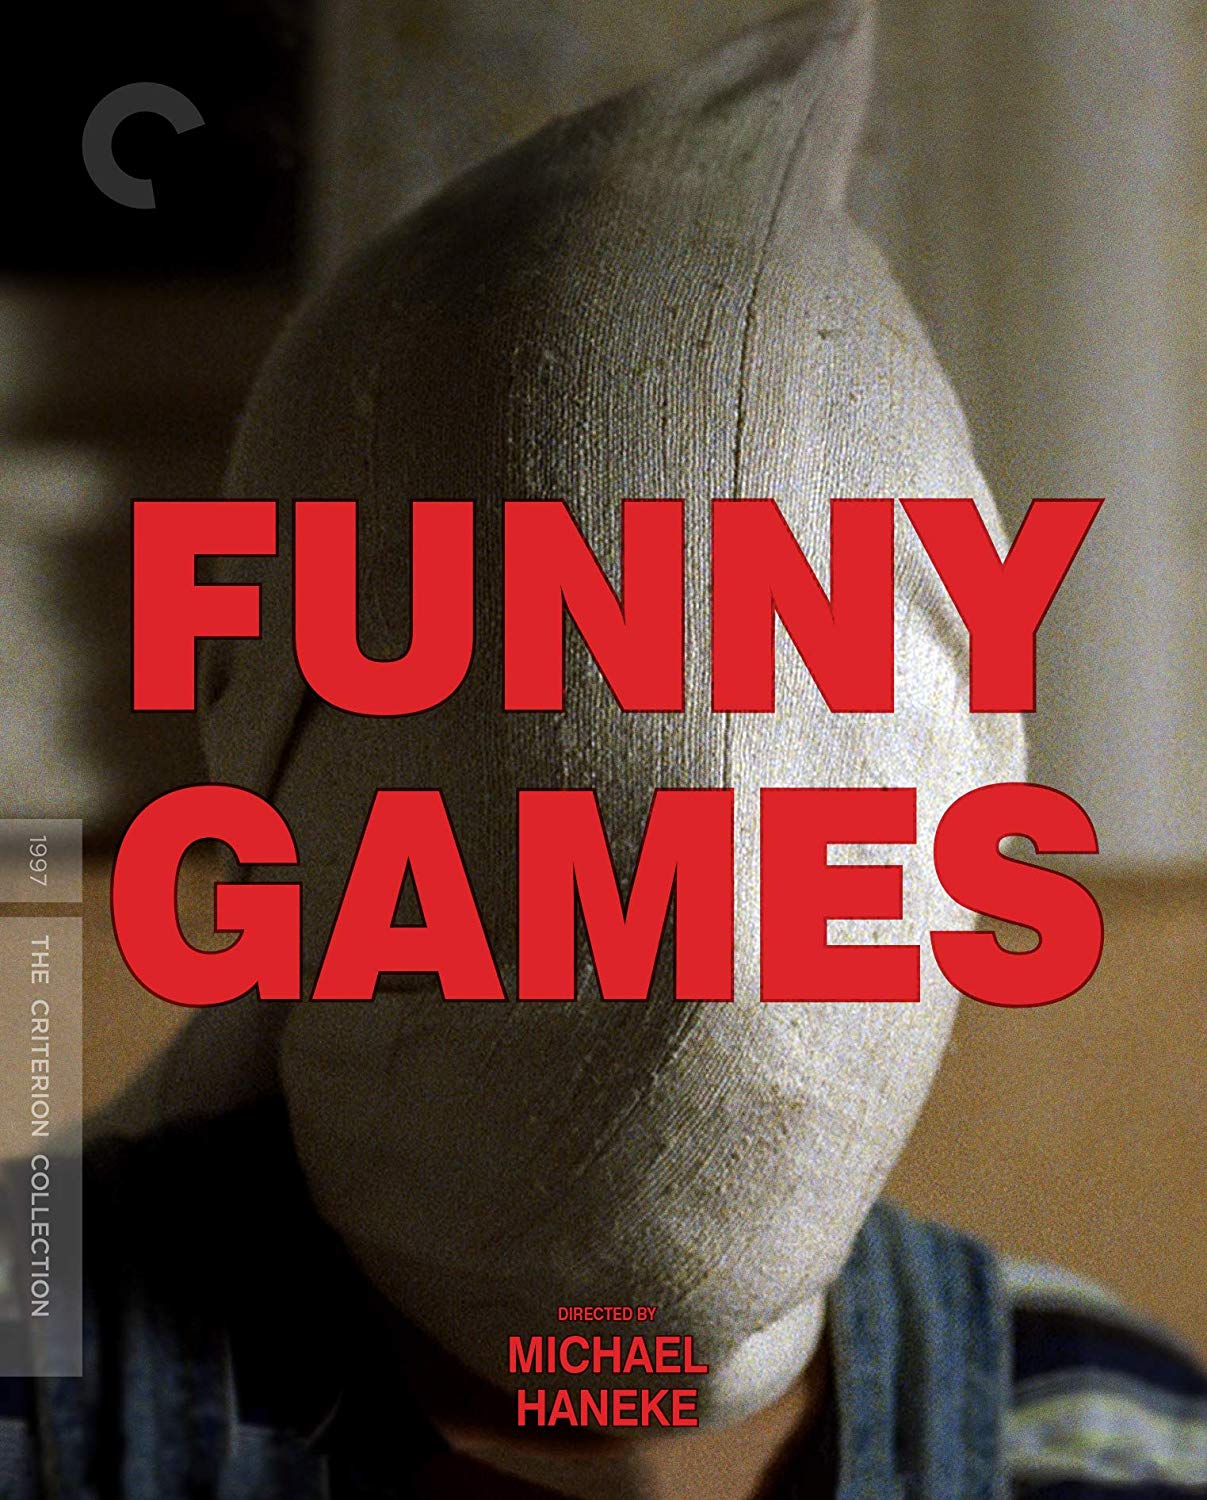 Funny Games [Criterion Collection] [Blu-ray] [1997]